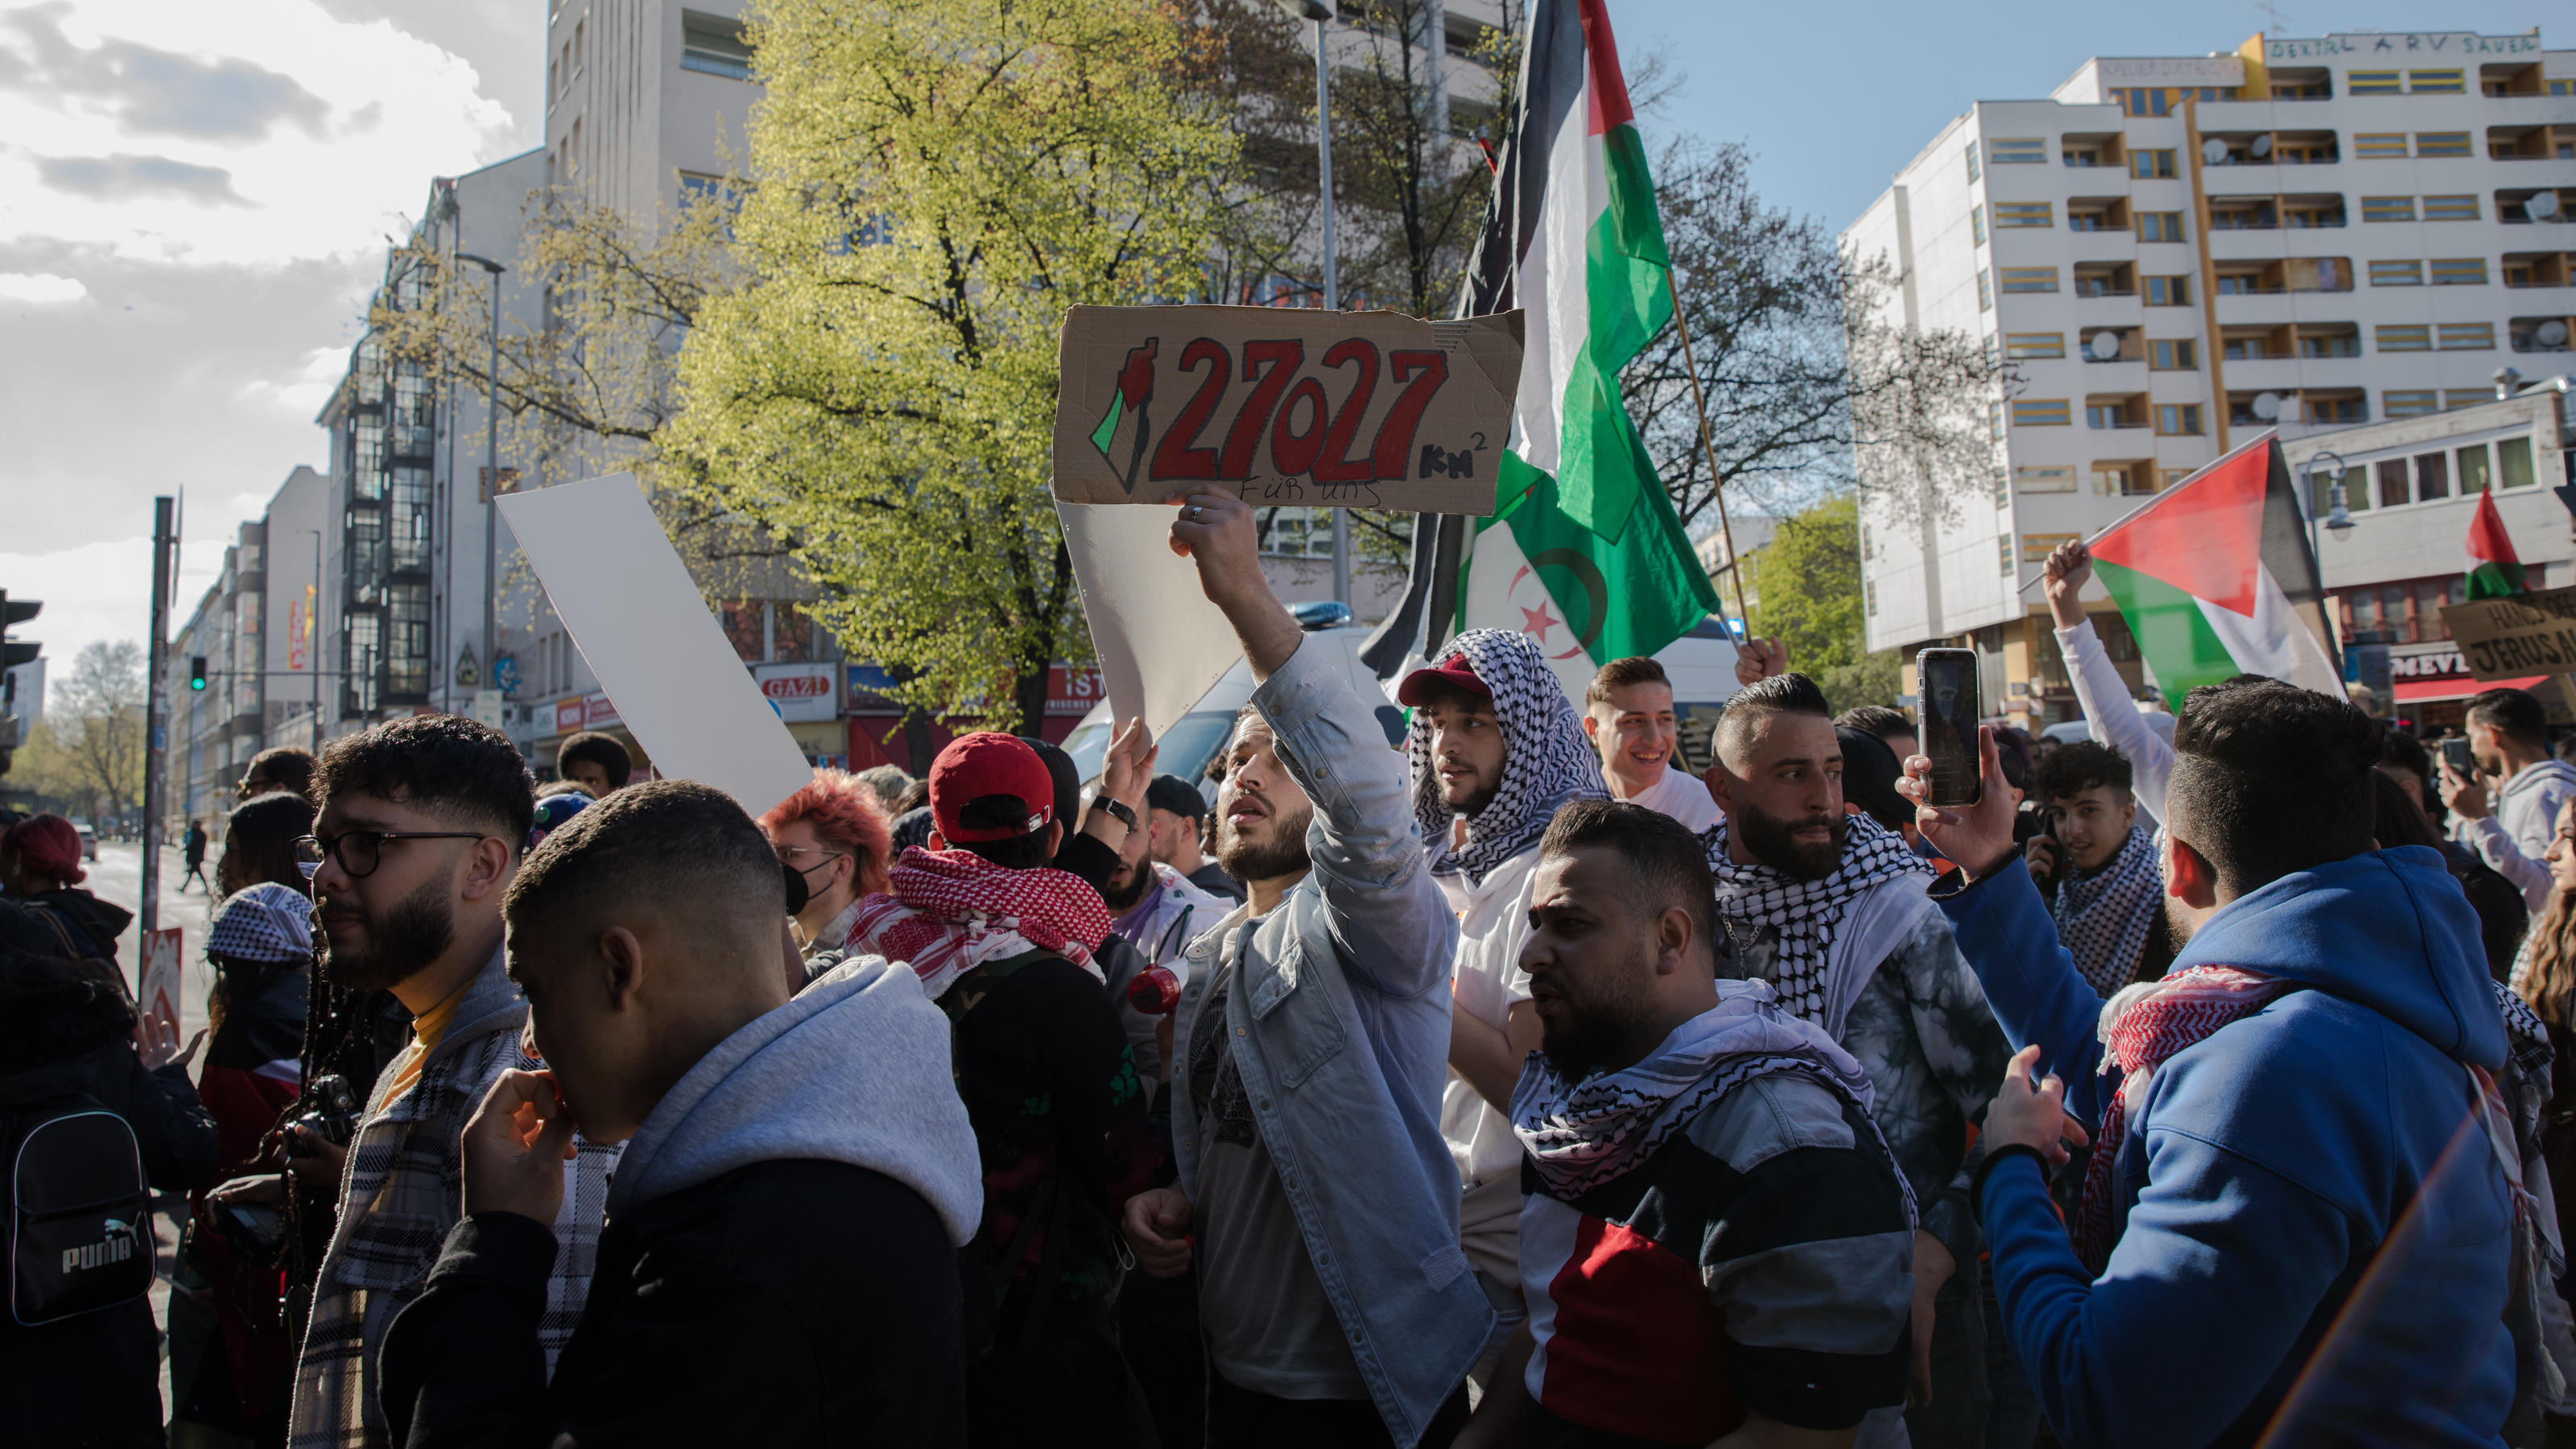 April 23, 2022, Berlin, Germany: Demonstrations in support of Palestinians in the ongoing Israel-Palestinian Conflict have been held across the globe in recent days. Also in Berlin, a large protest was organized on April 23, 2022. Many of the partici